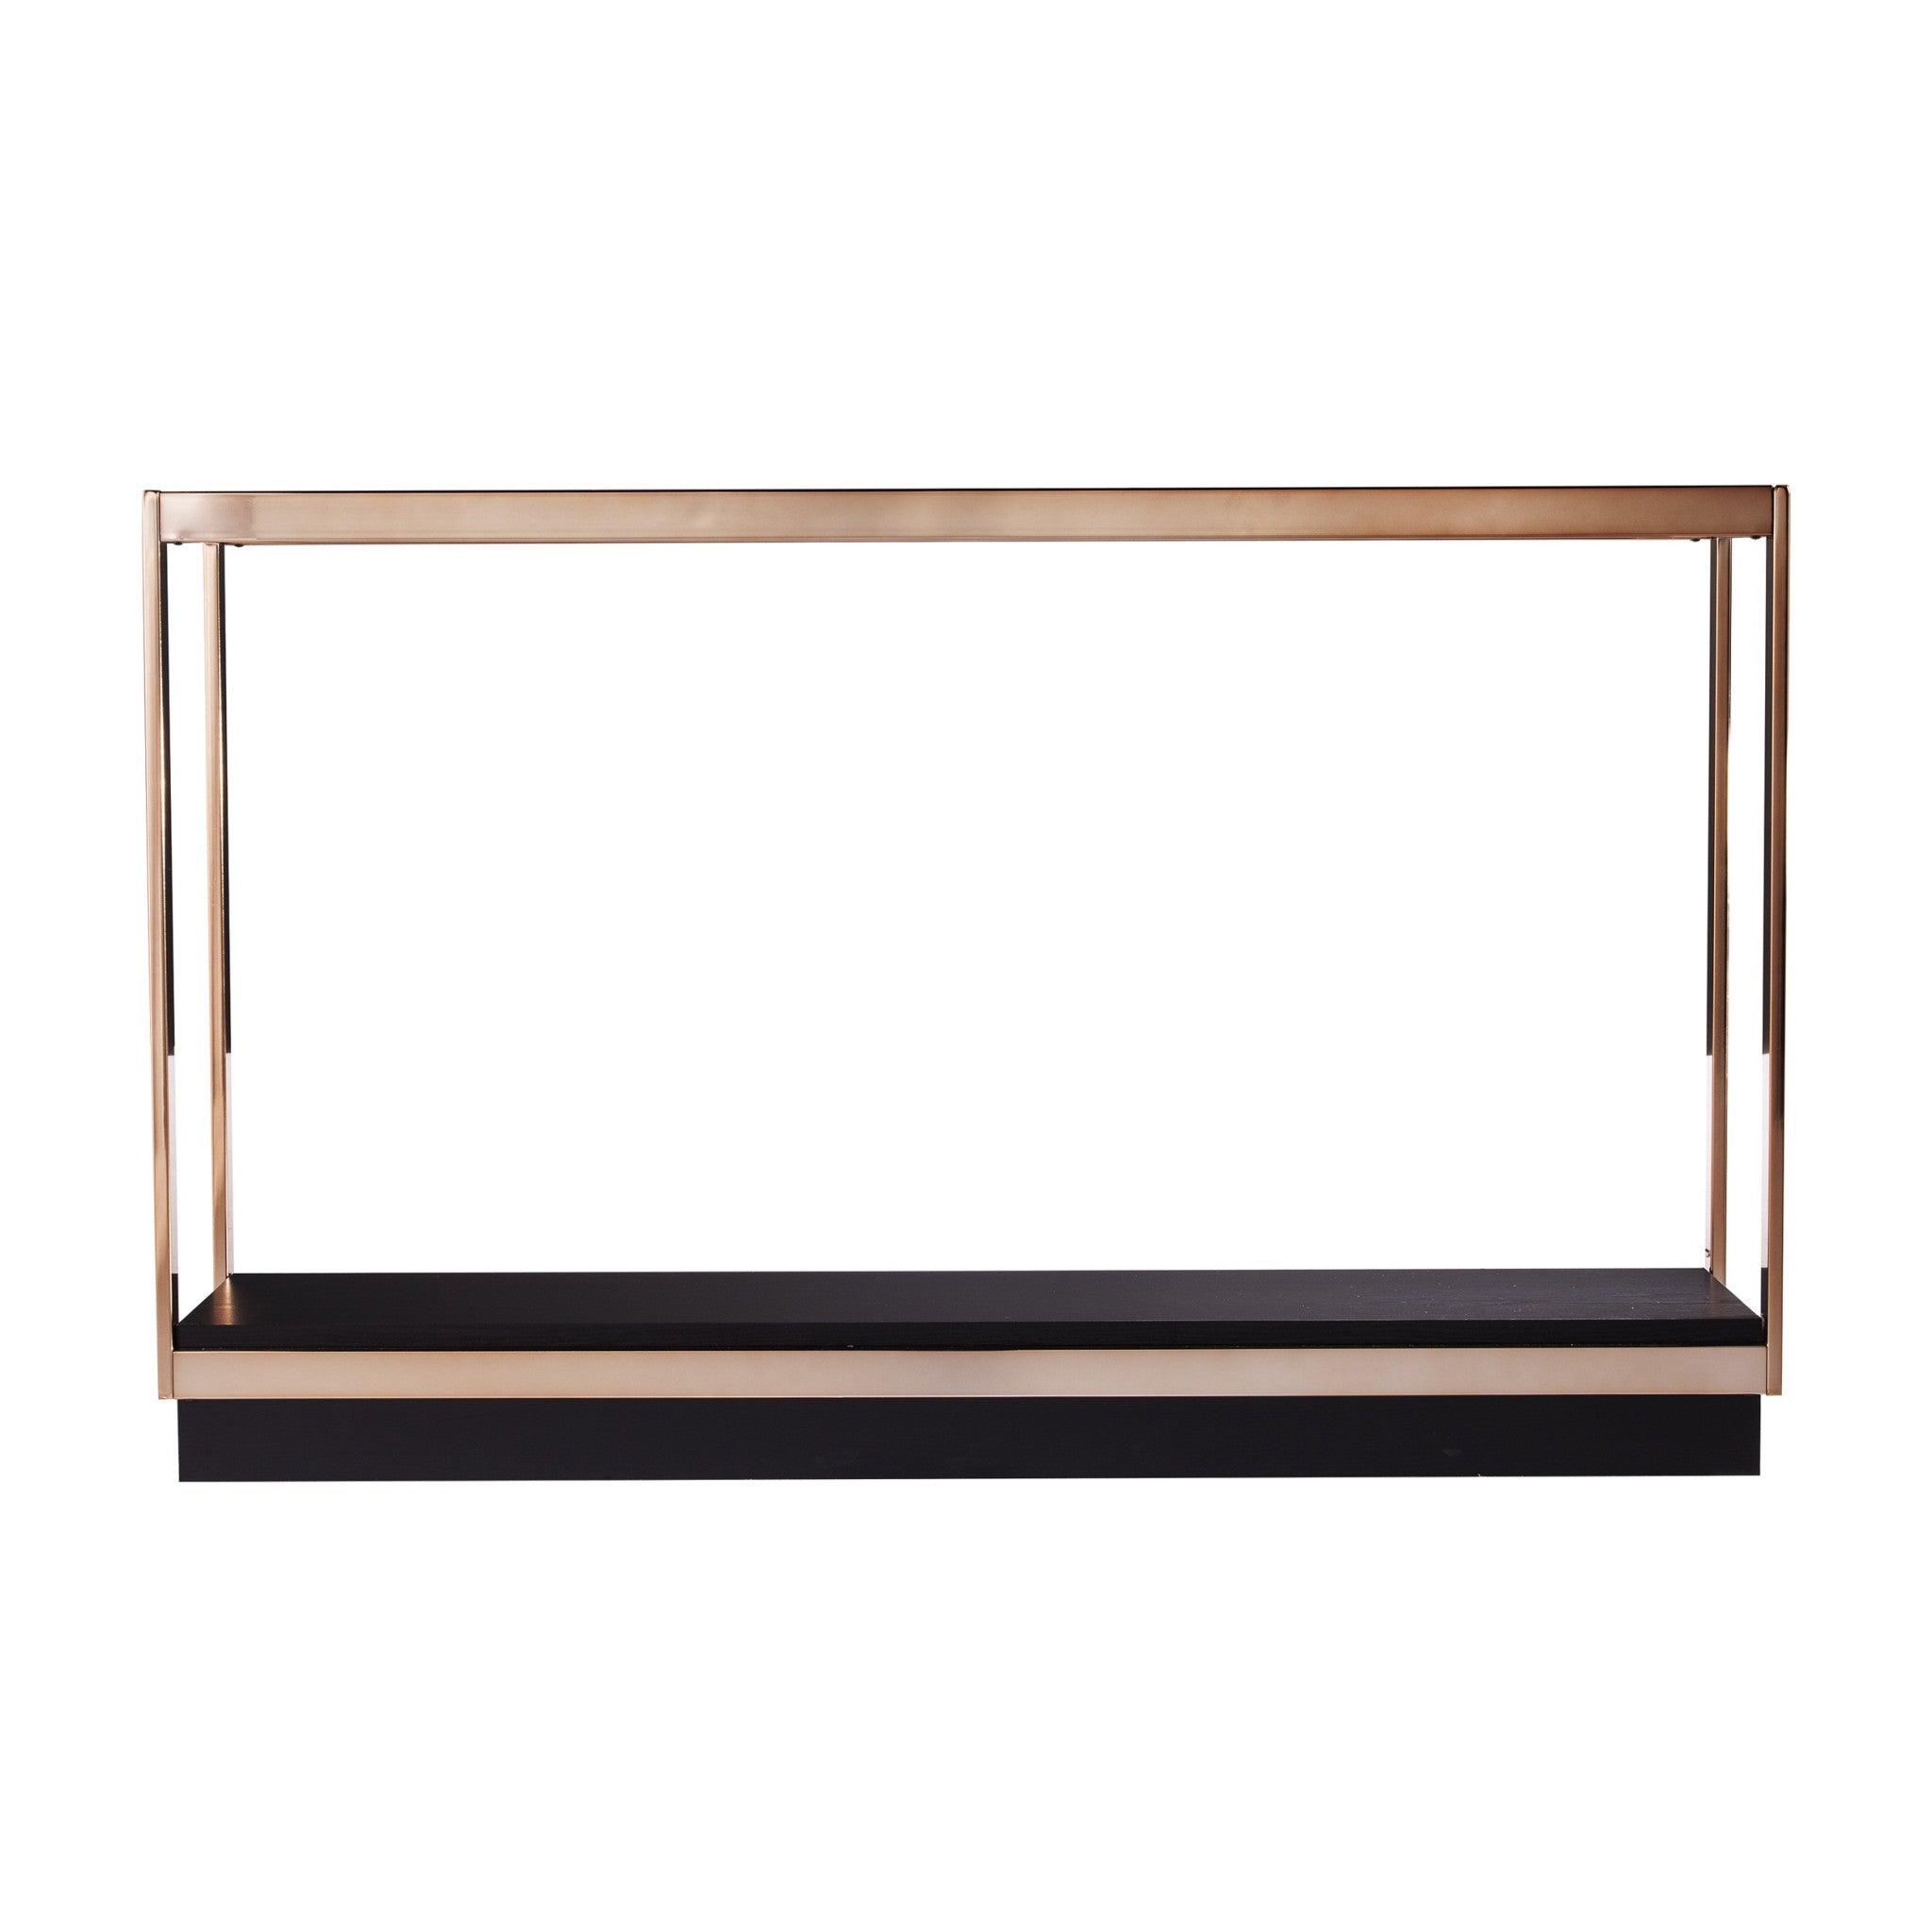 48" Clear and Champagne Glass Floor Shelf Console Table With Storage